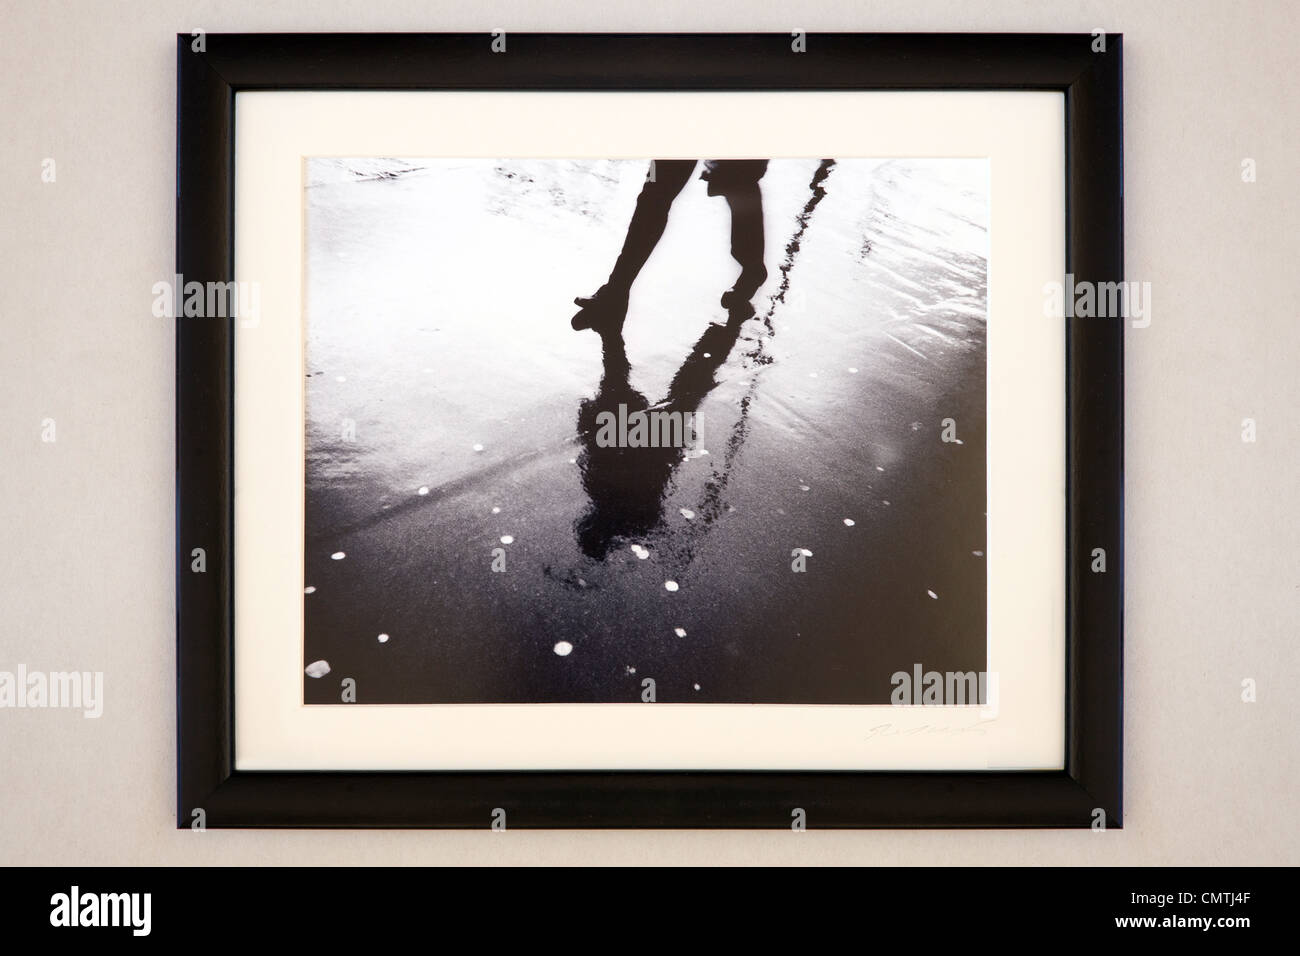 Framed black and white photograph of pedestrian on wet pavement Stock Photo